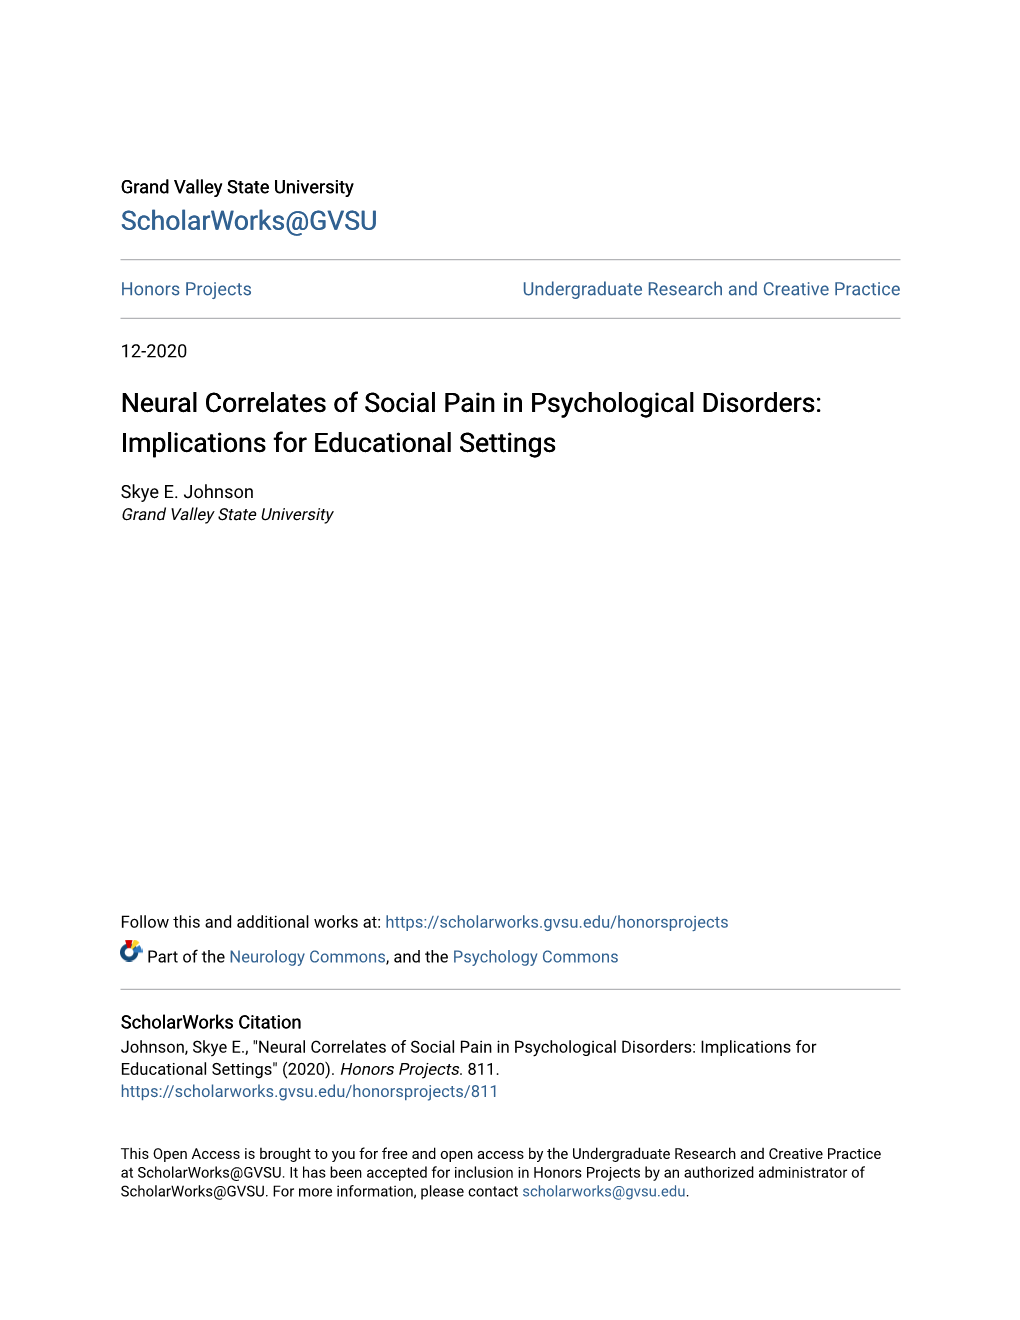 Neural Correlates of Social Pain in Psychological Disorders: Implications for Educational Settings